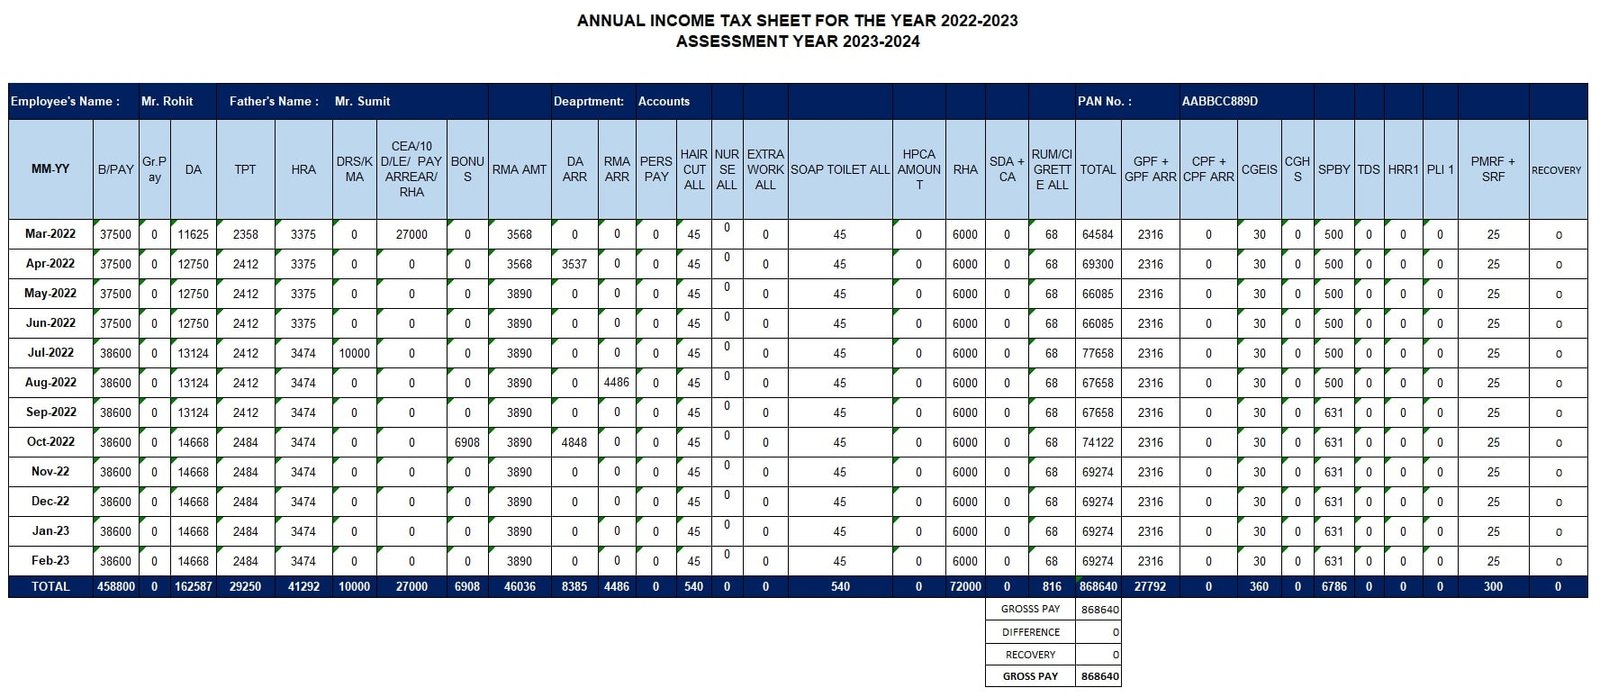 Annual Income Tax Sheet For The Year 2022-2023